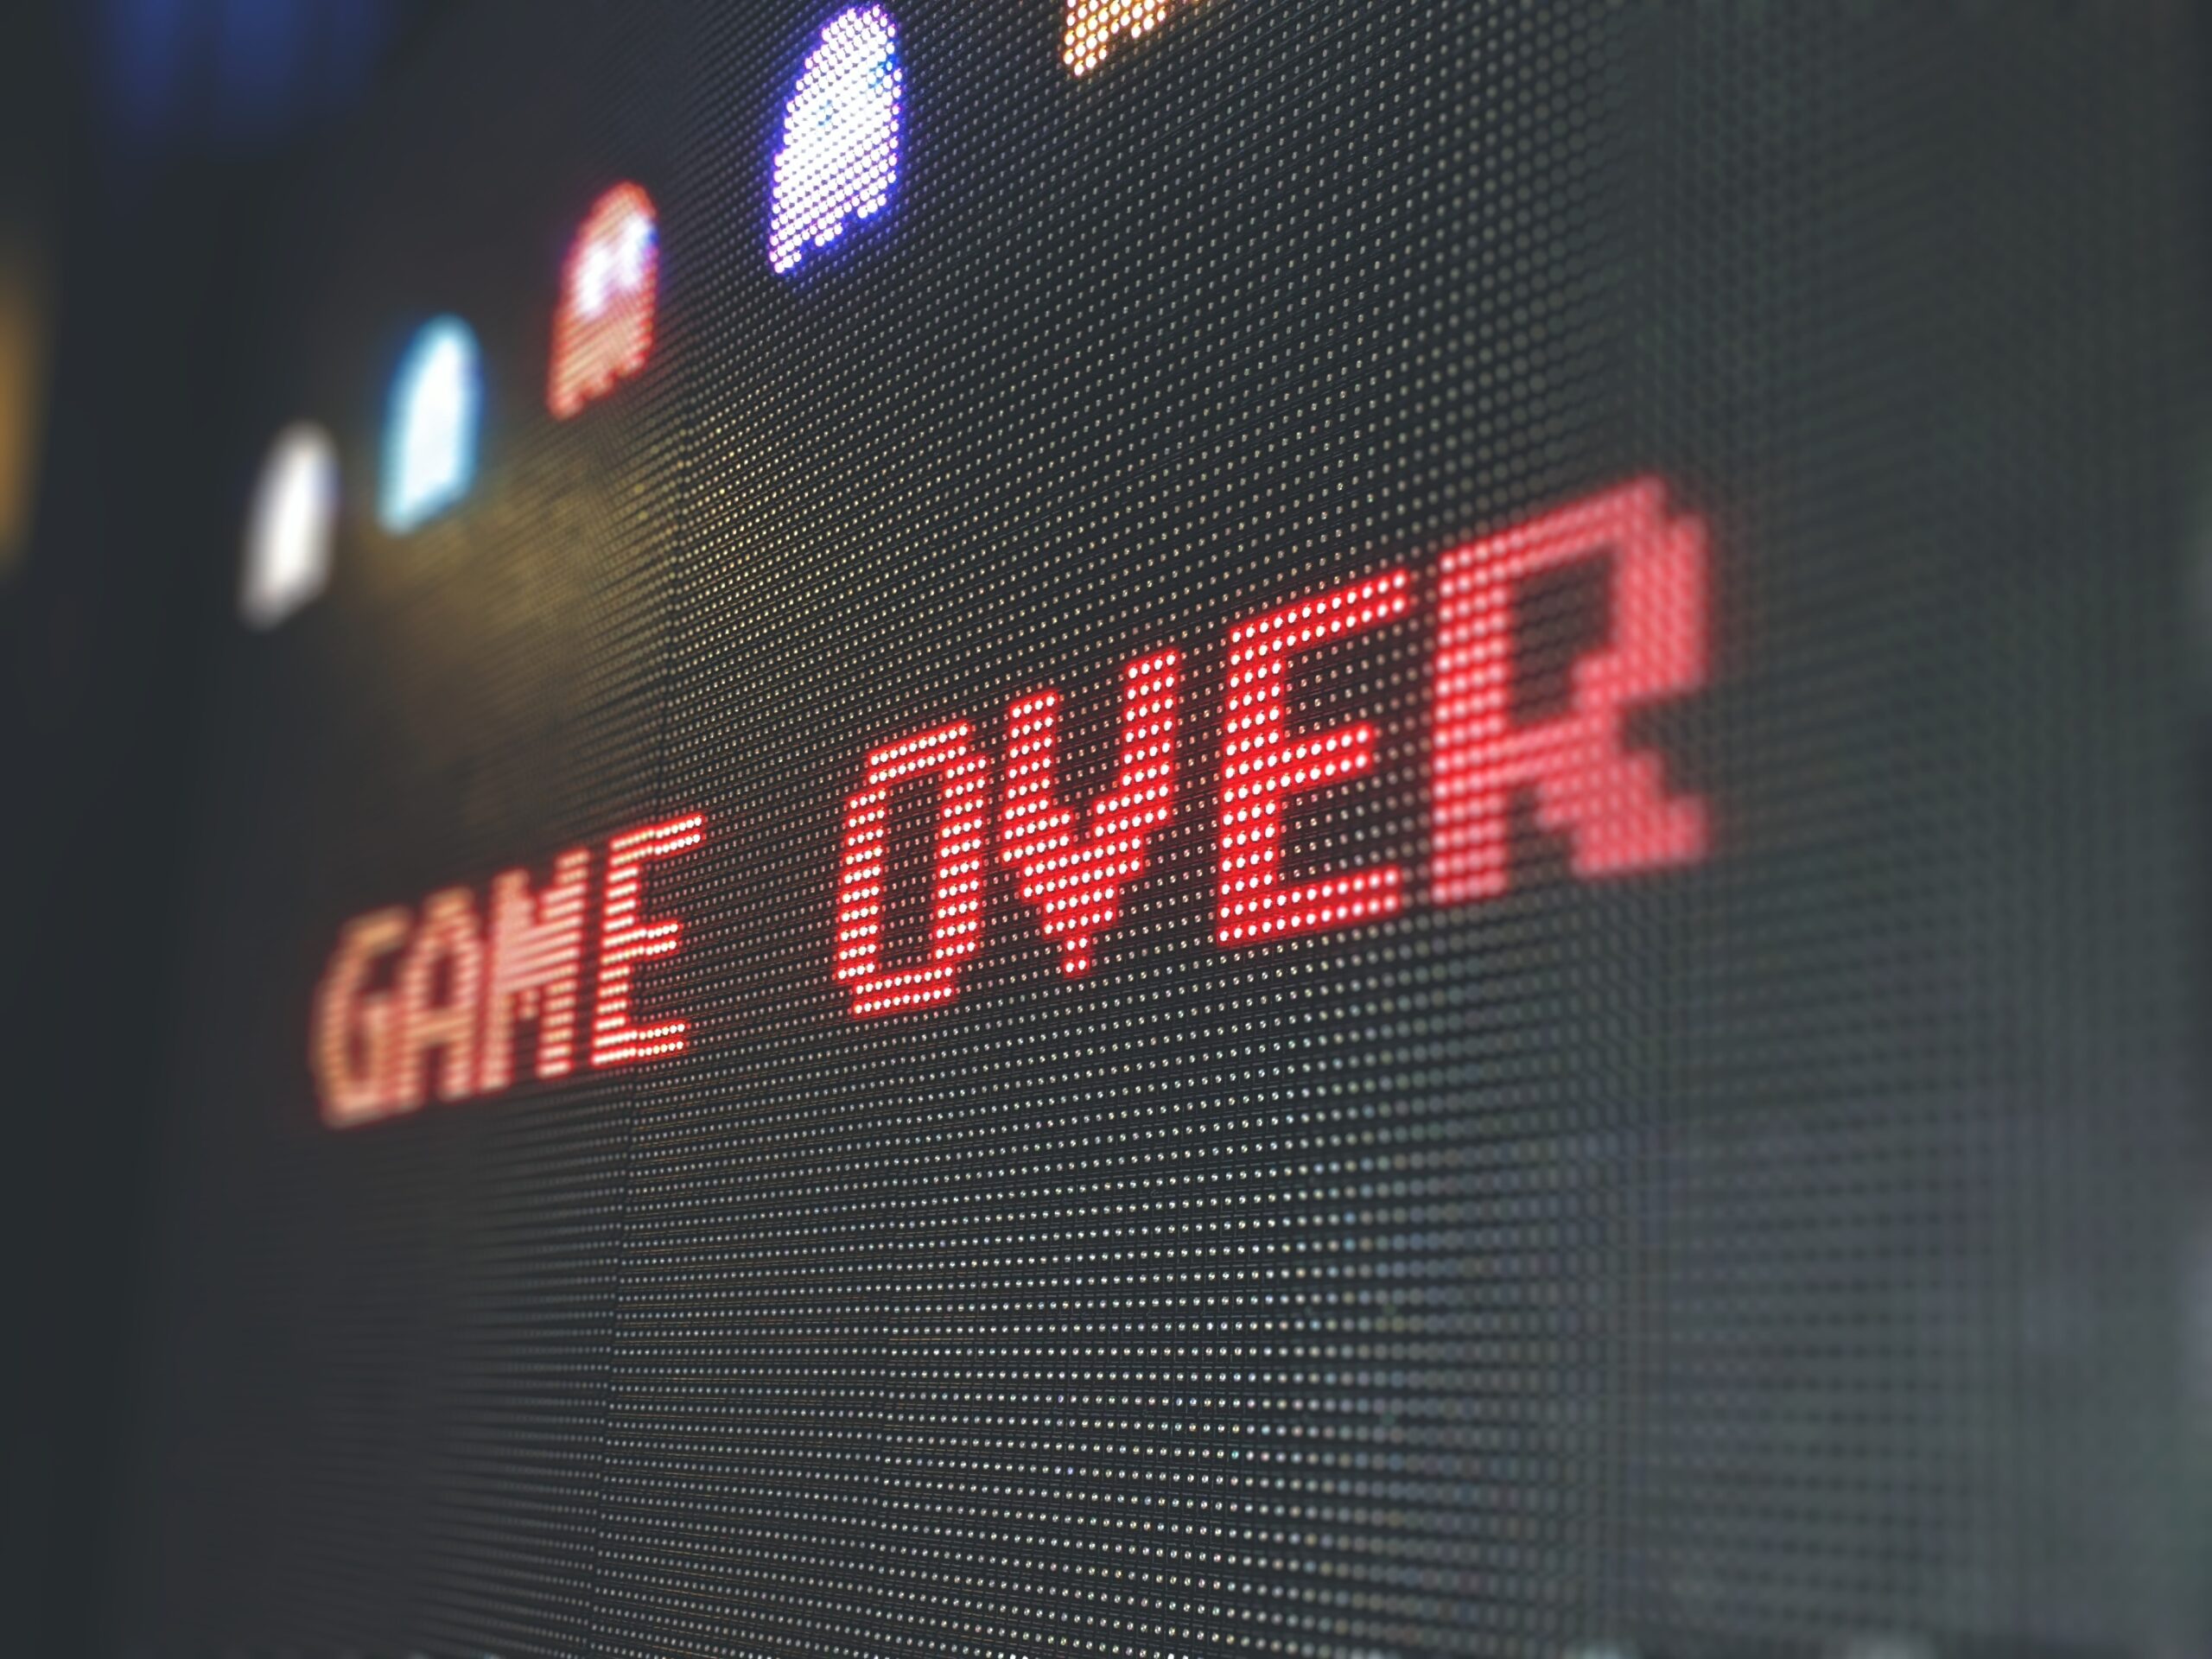 Game Over on a PacMan arcade machine screen